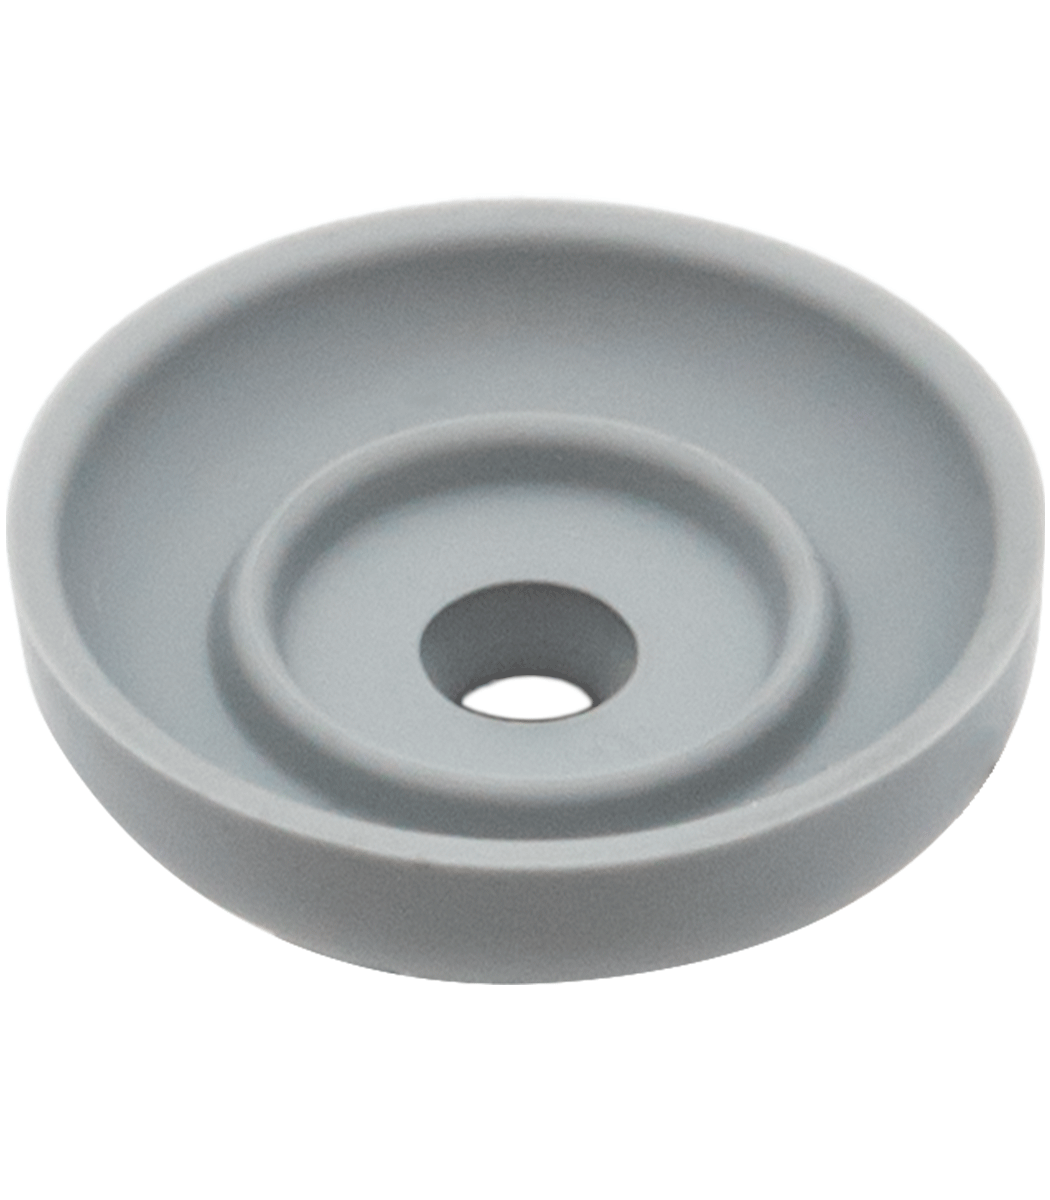 Wesbite Name: Grey Dome Roof Washer